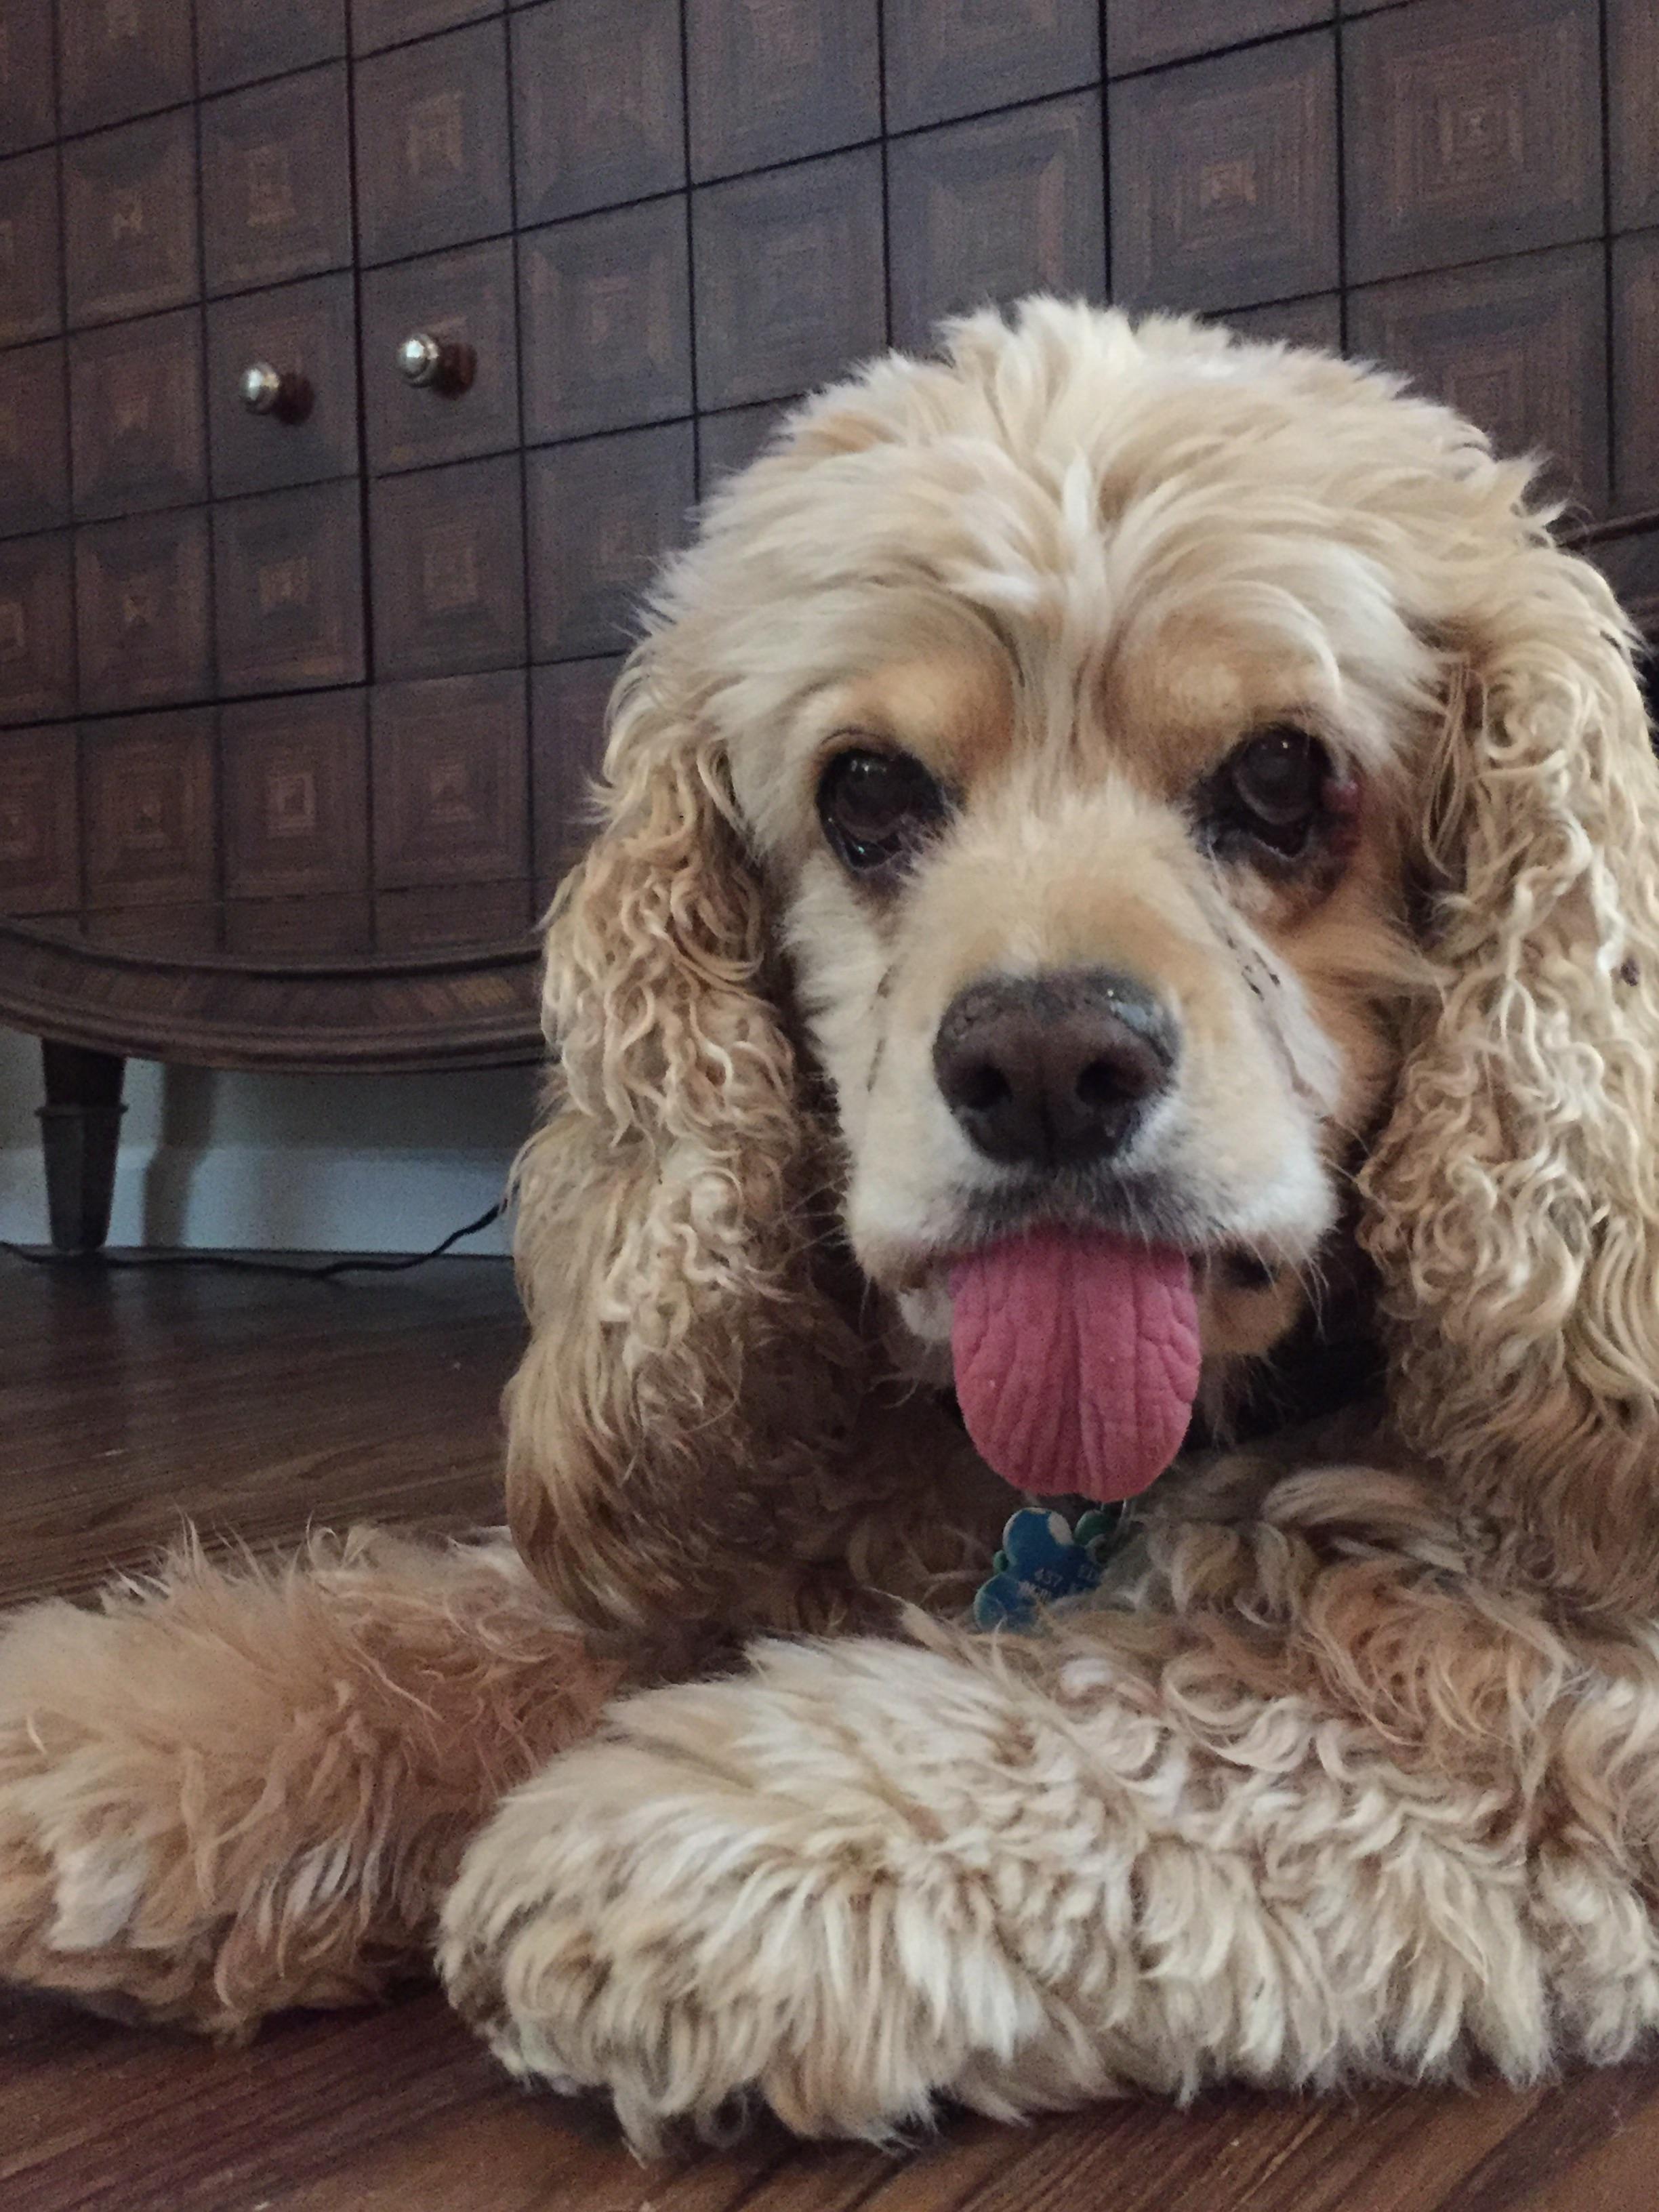 curly haired cream color Cocker Spaniel sticking its tongue out